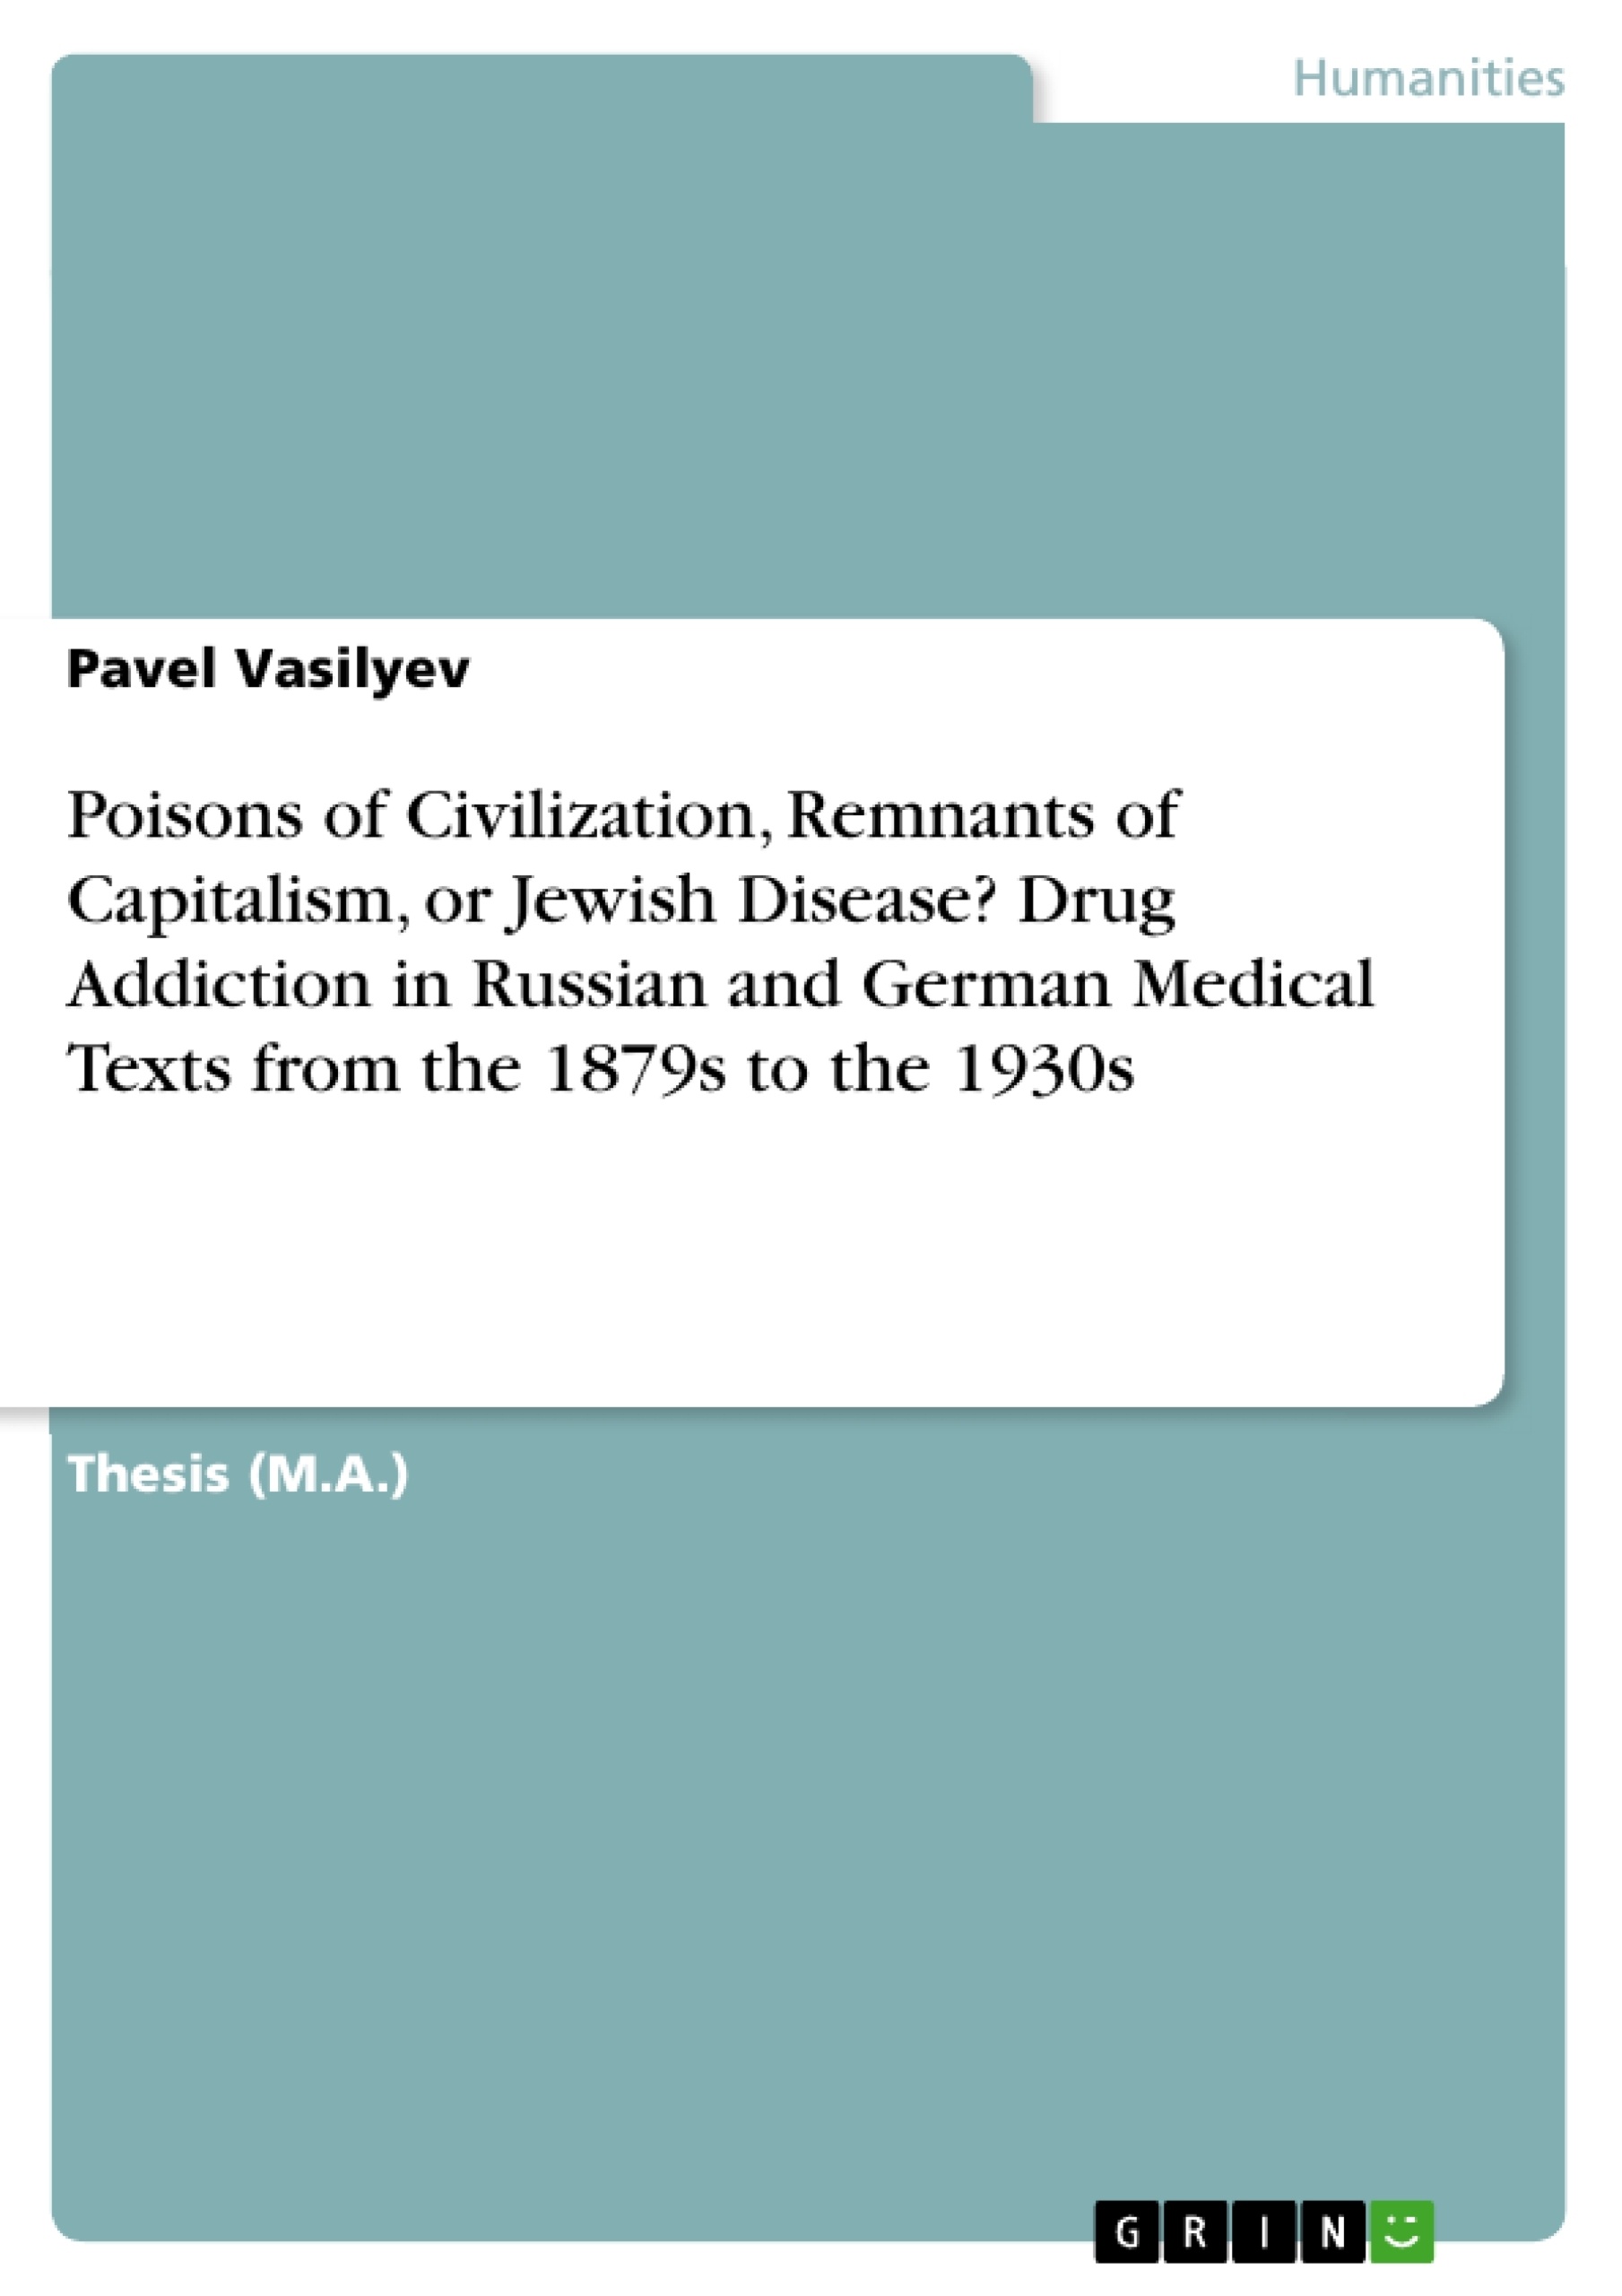 Title: Poisons of Civilization, Remnants of Capitalism, or Jewish Disease? Drug Addiction in Russian and German Medical Texts from the 1879s to the 1930s